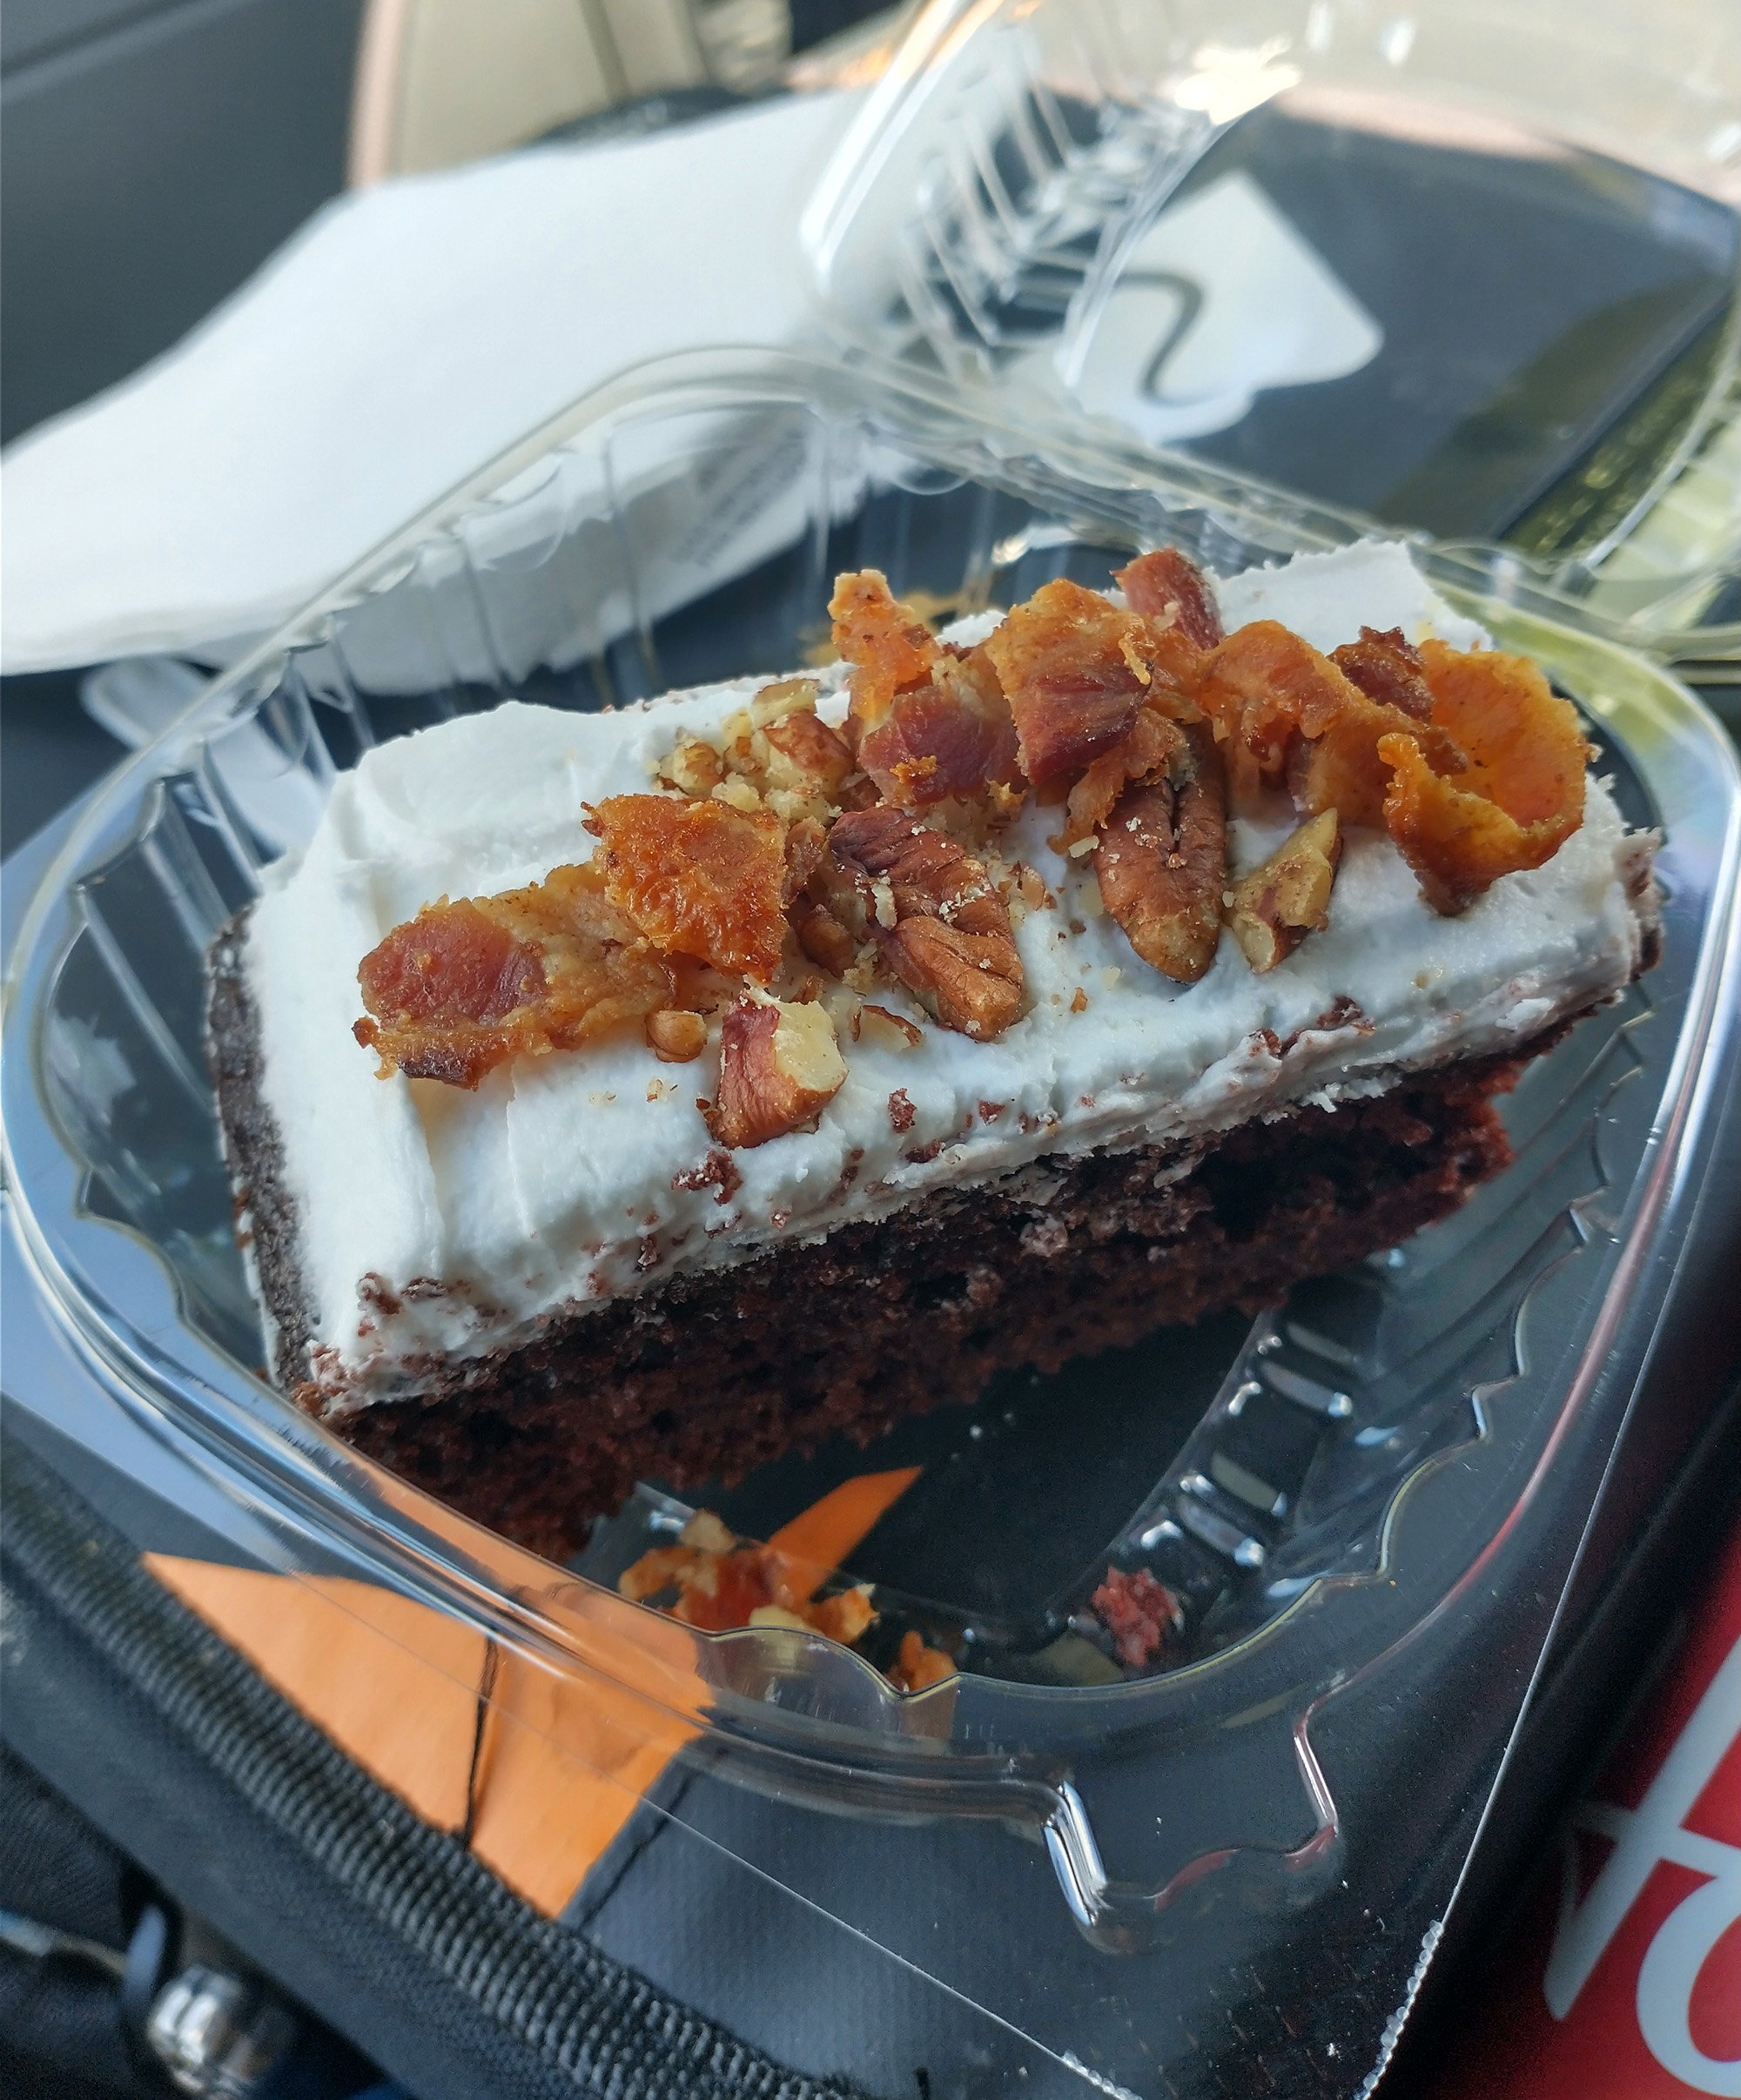 Back at the bakery I got myself this bacon-covered brownie. Whatever happened to bacon after the early 2000s? Why did we abandon that fad? Bring it back.